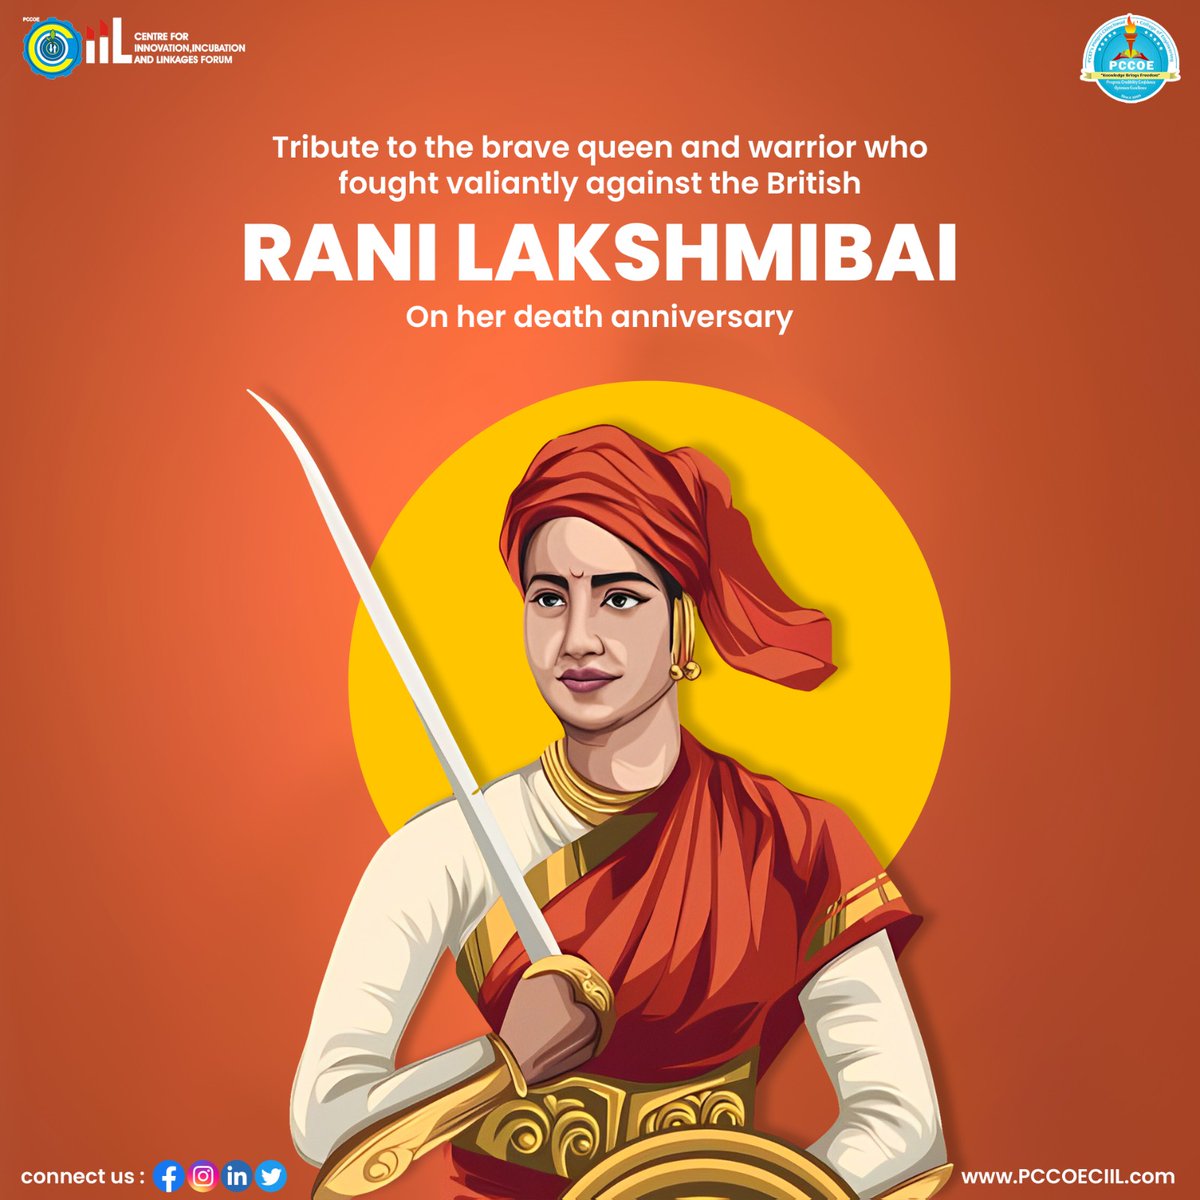 Her legacy as a fearless warrior and a symbol of Indian nationalism continues to inspire people today. Let's pay tribute to Rani Lakshmibai On her death anniversary!!

#PCET #CIIL #JhansiKiRani #manikarnika #ranilaxmibai🚩 #History #india #ranilaxmibai #JhansiKiRaniLaxmibai